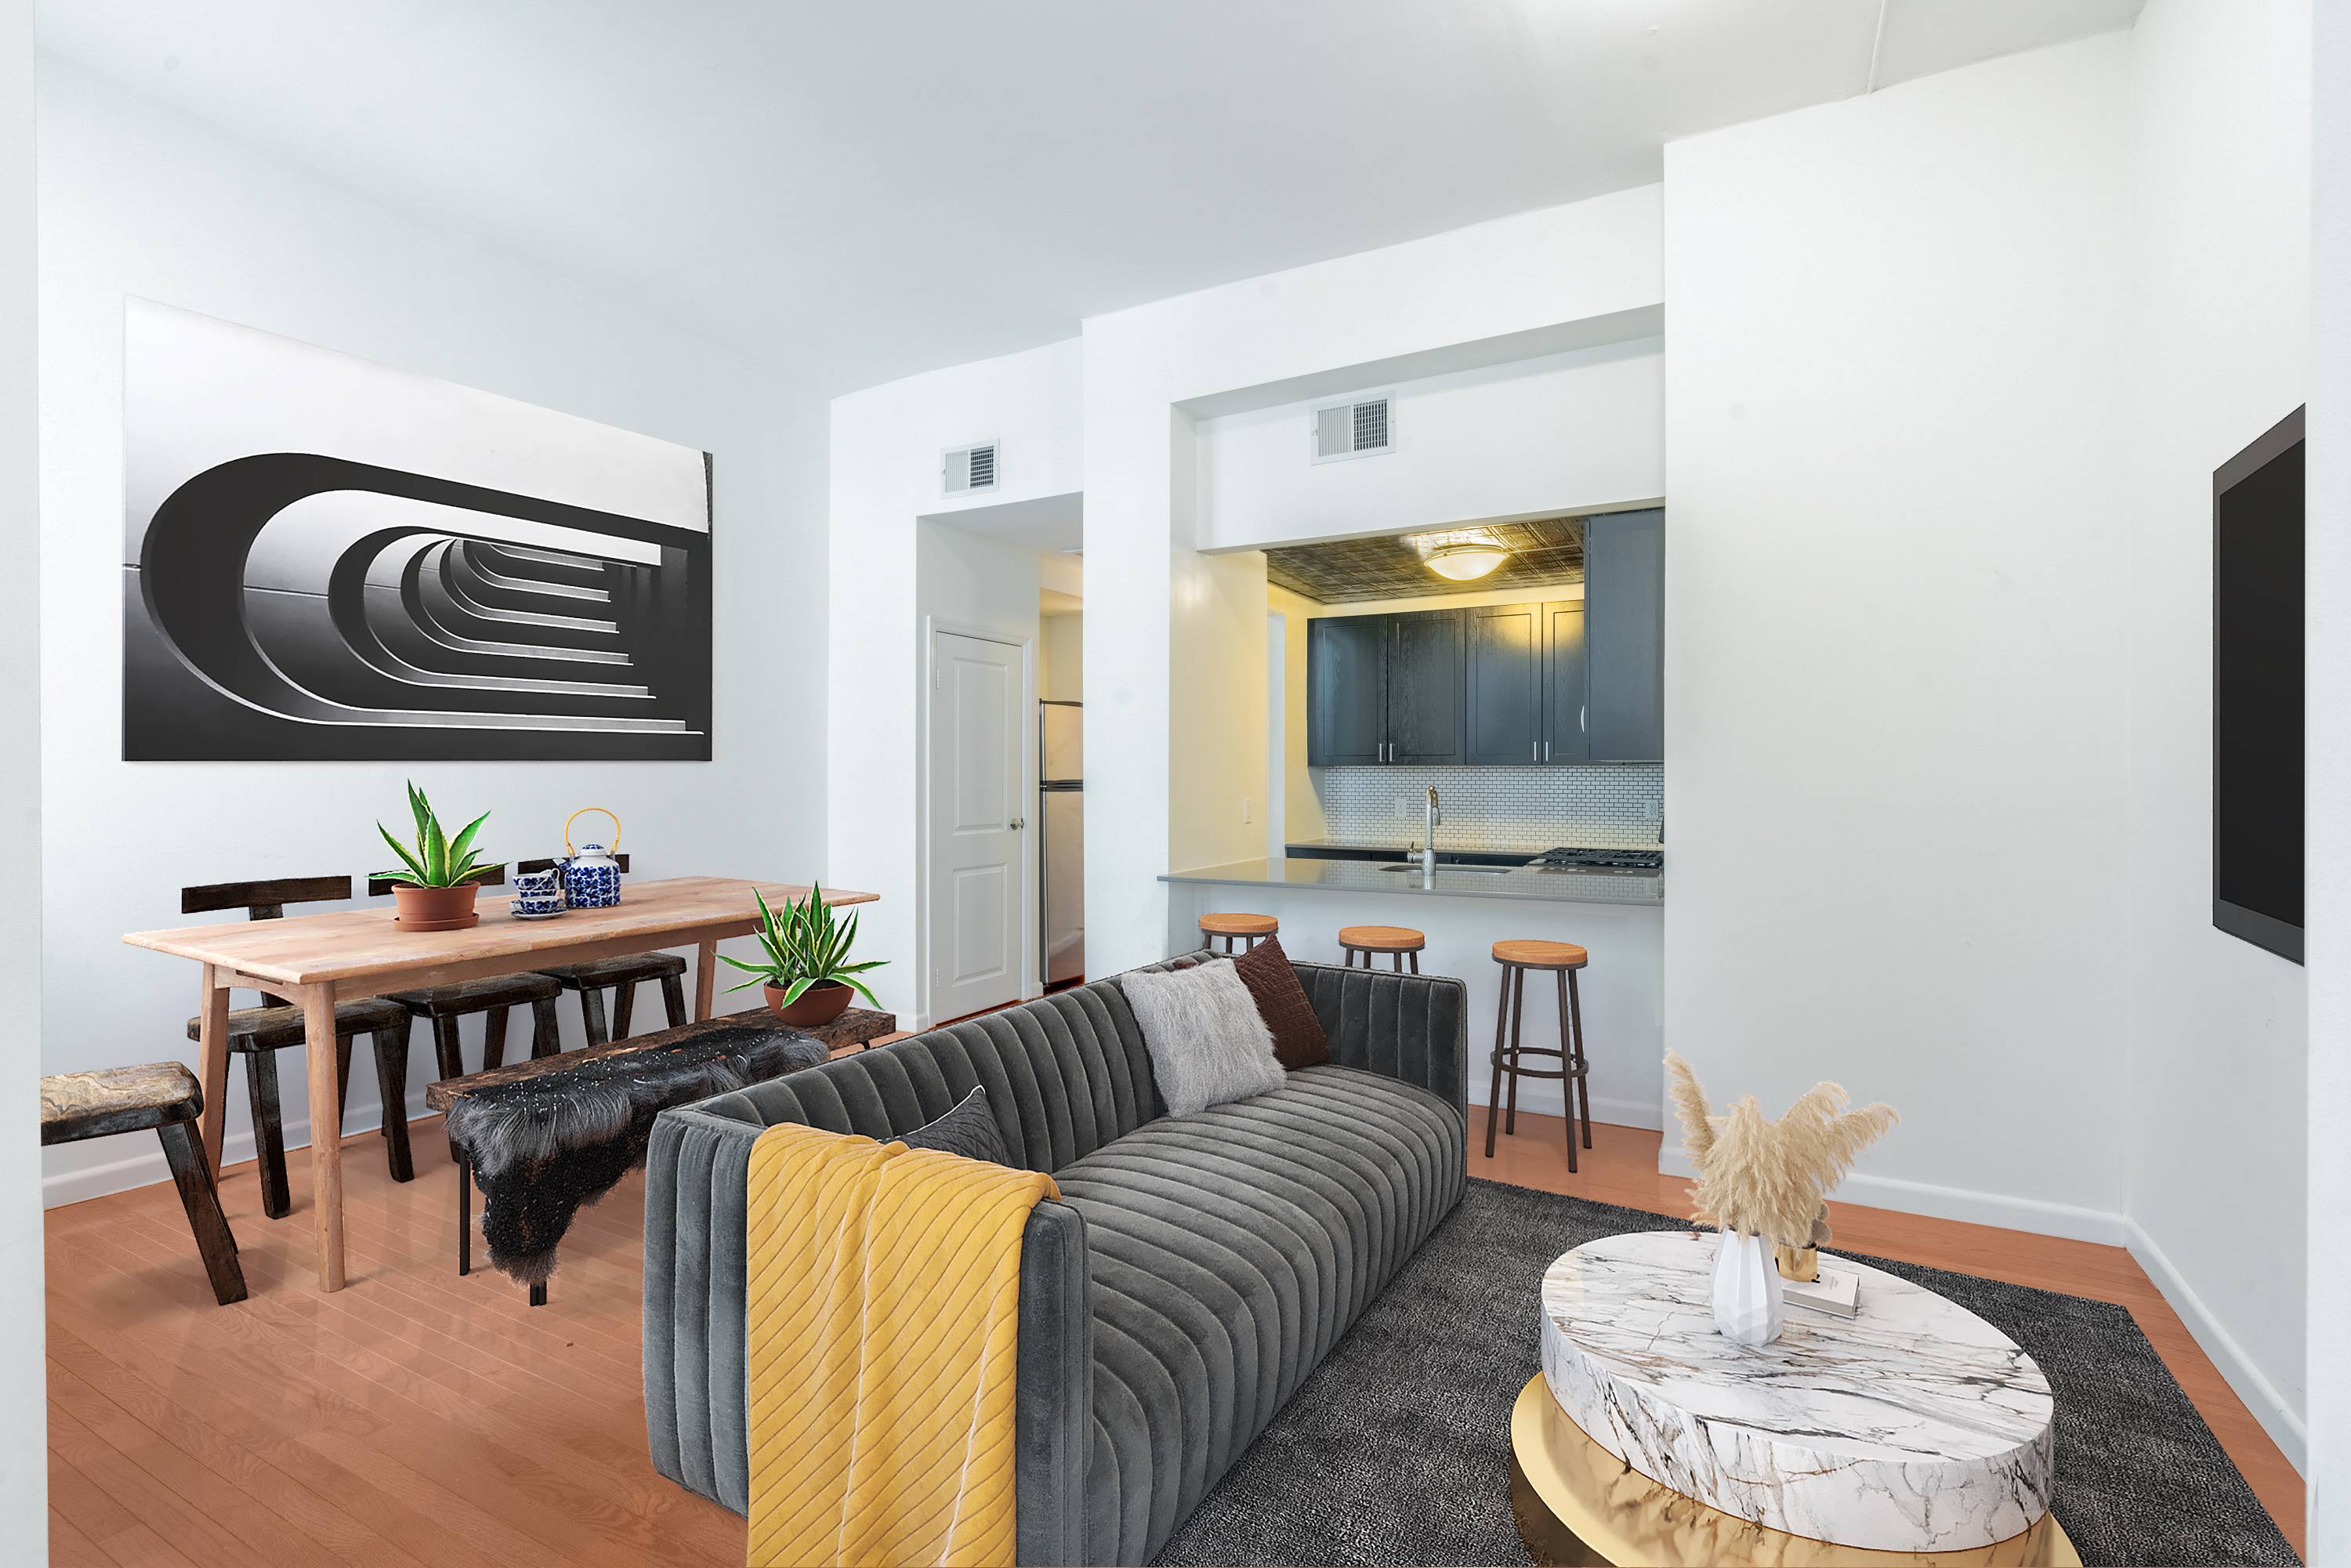 Stunning 1 Bedroom Renovated Apartment in Downtown Hoboken, NJ .  Laundry on site, Storage Available! All New Stainless Steel Appliances!  $1,000 Security Deposit, 1 Month Free and No Broker Fees!